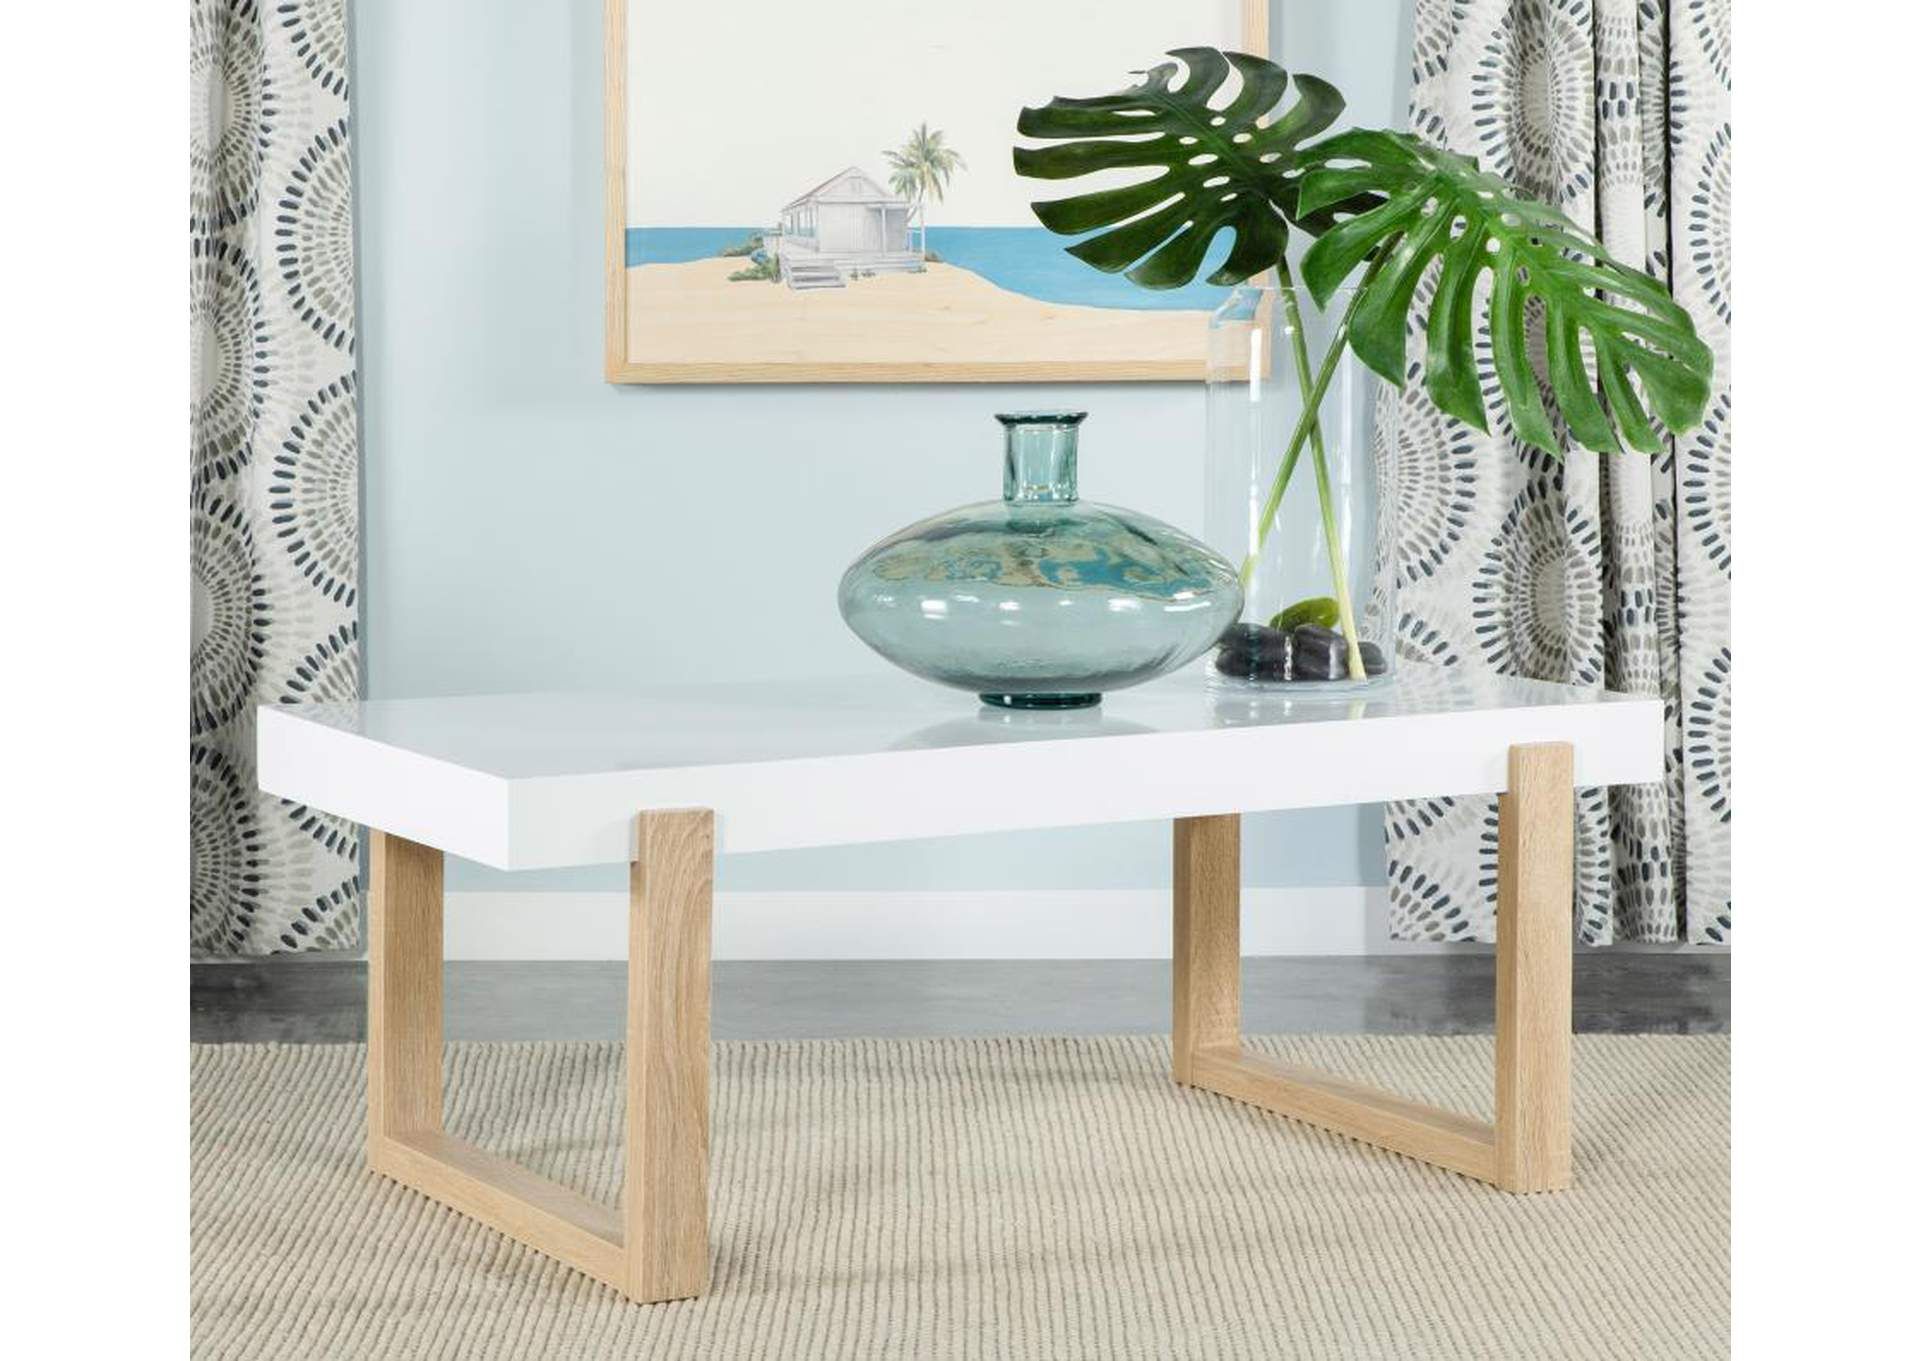 Pala Rectangular Coffee Table With Sled Base White High Gloss And Natural  Cohen'S Furniture – New Castle, De Intended For Rectangular Coffee Tables With Pedestal Bases (View 13 of 15)